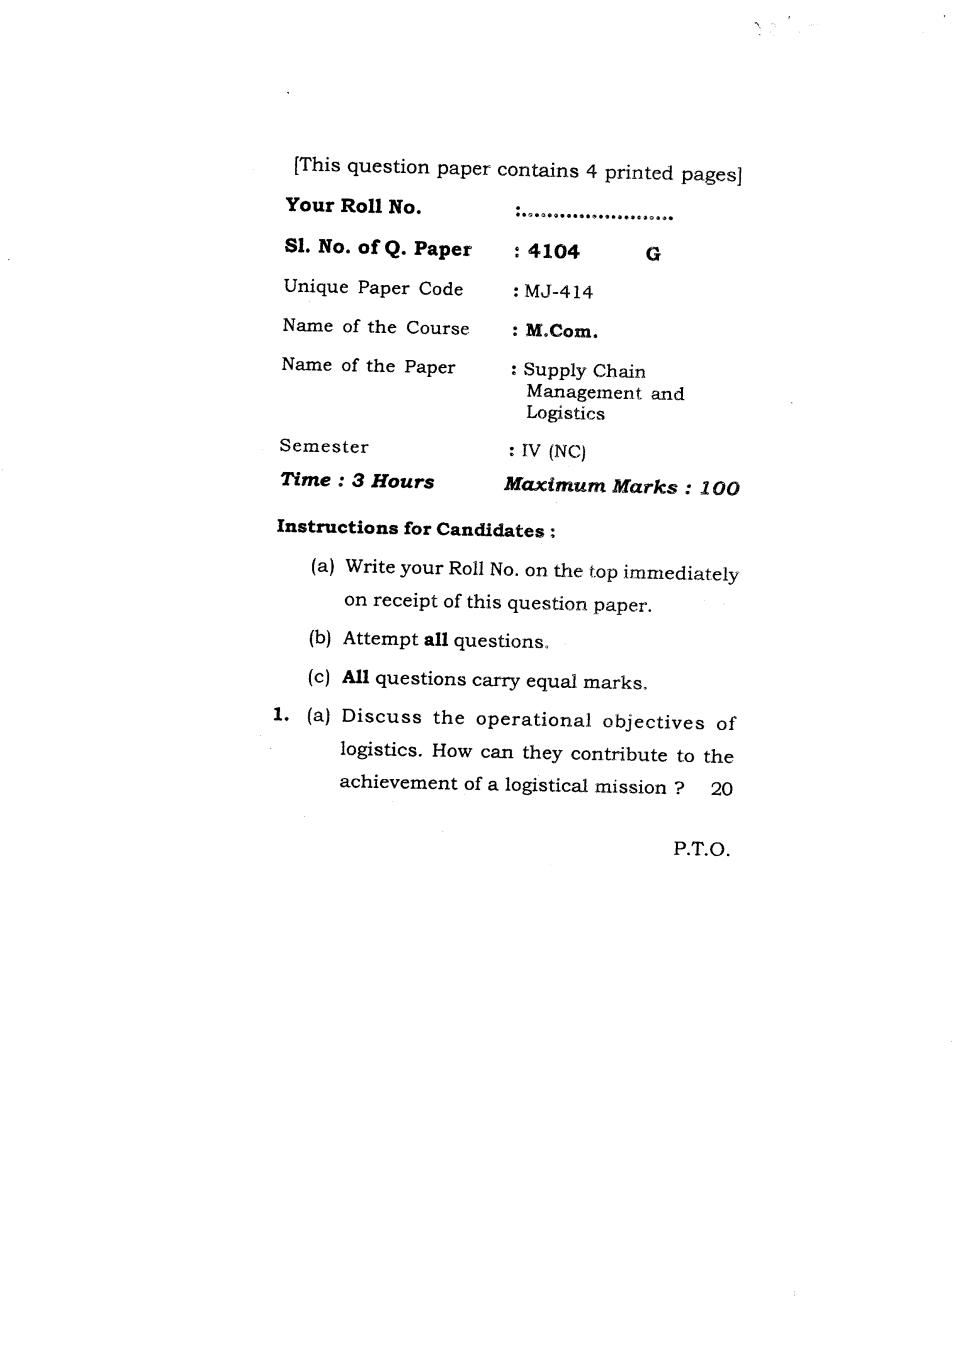 DU SOL M.Com Question Paper 2nd Year 2018 Sem 4 Supply Chain Management And Logistics - Page 1